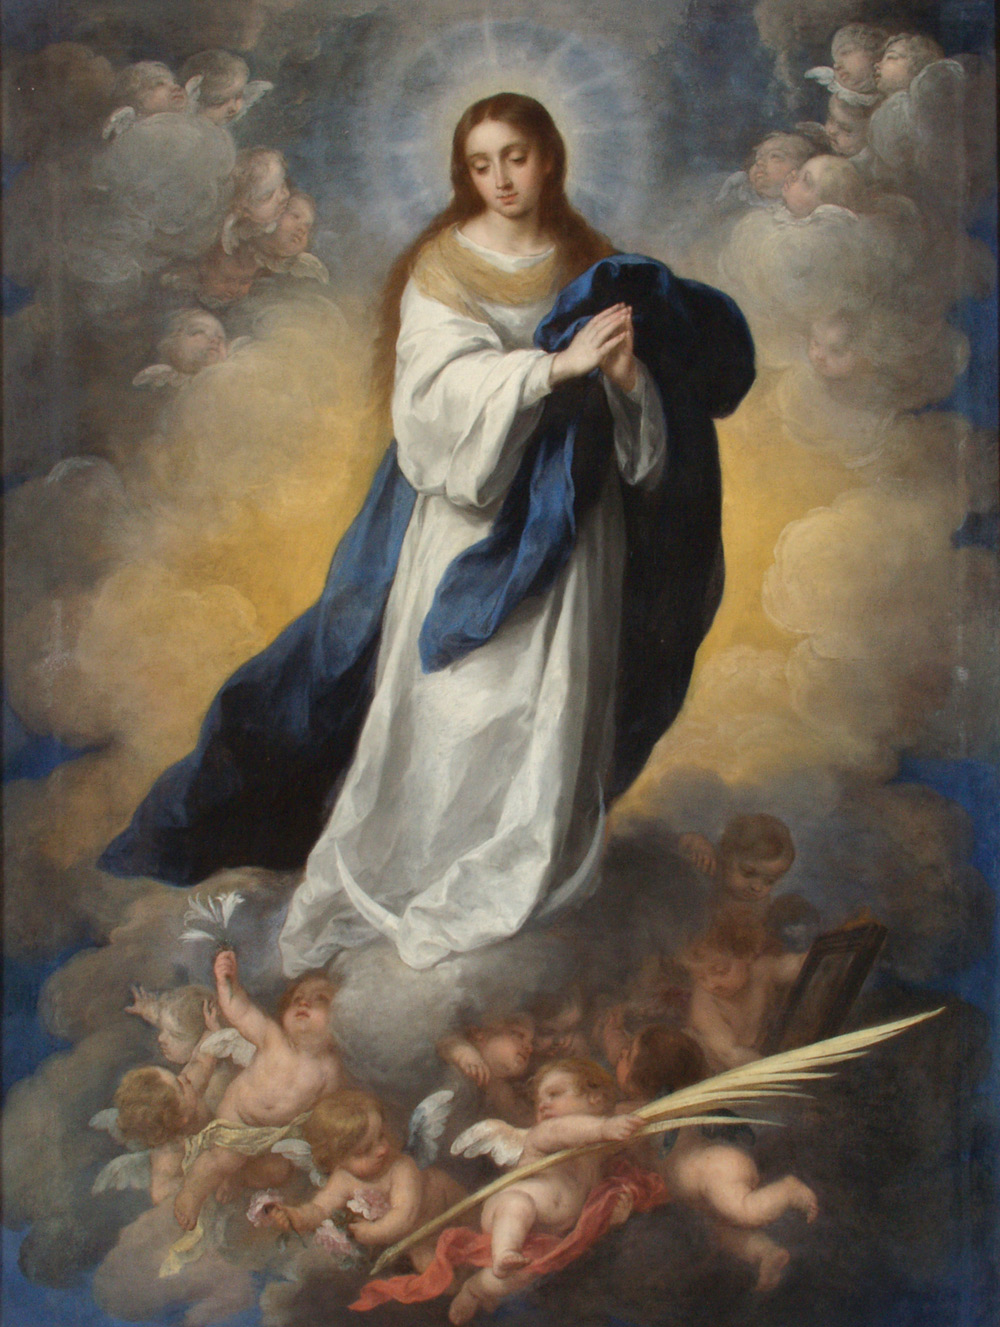 Immaculate Conception: Before Our Lady Was Born, She Opposed Satan